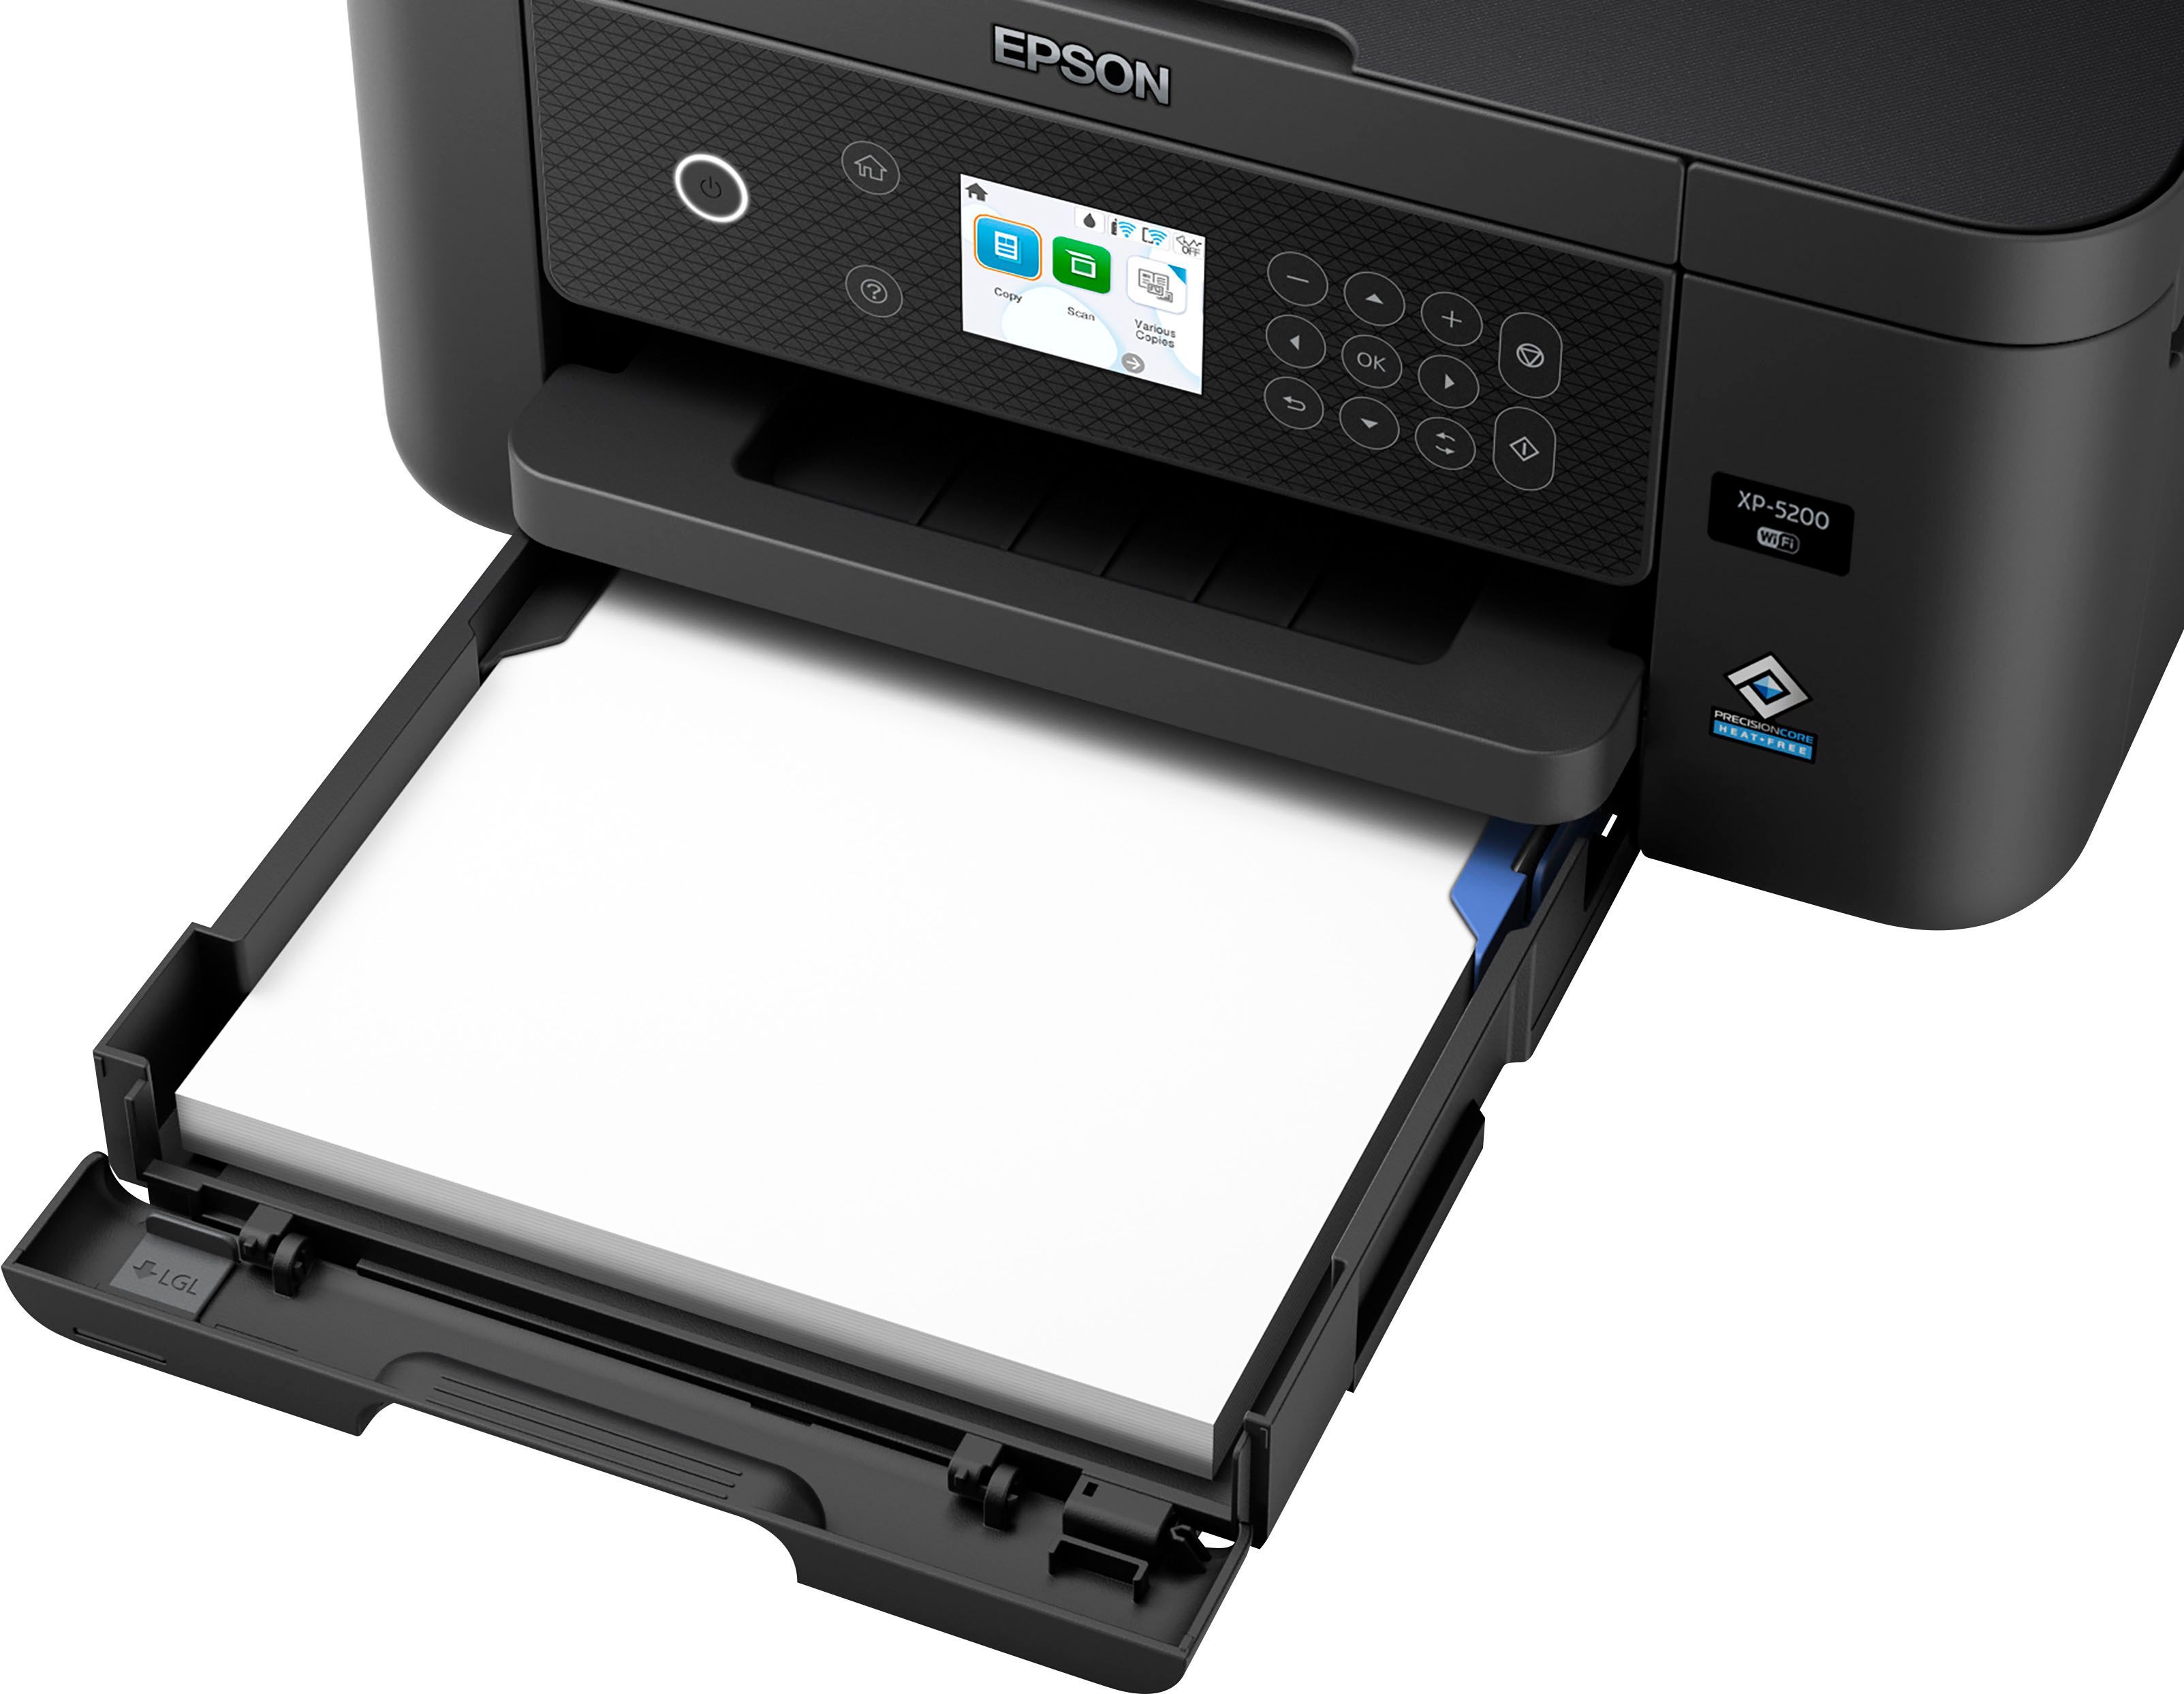 Epson Expression Home XP-5205 A4 Colour Multifunction Inkjet Printer